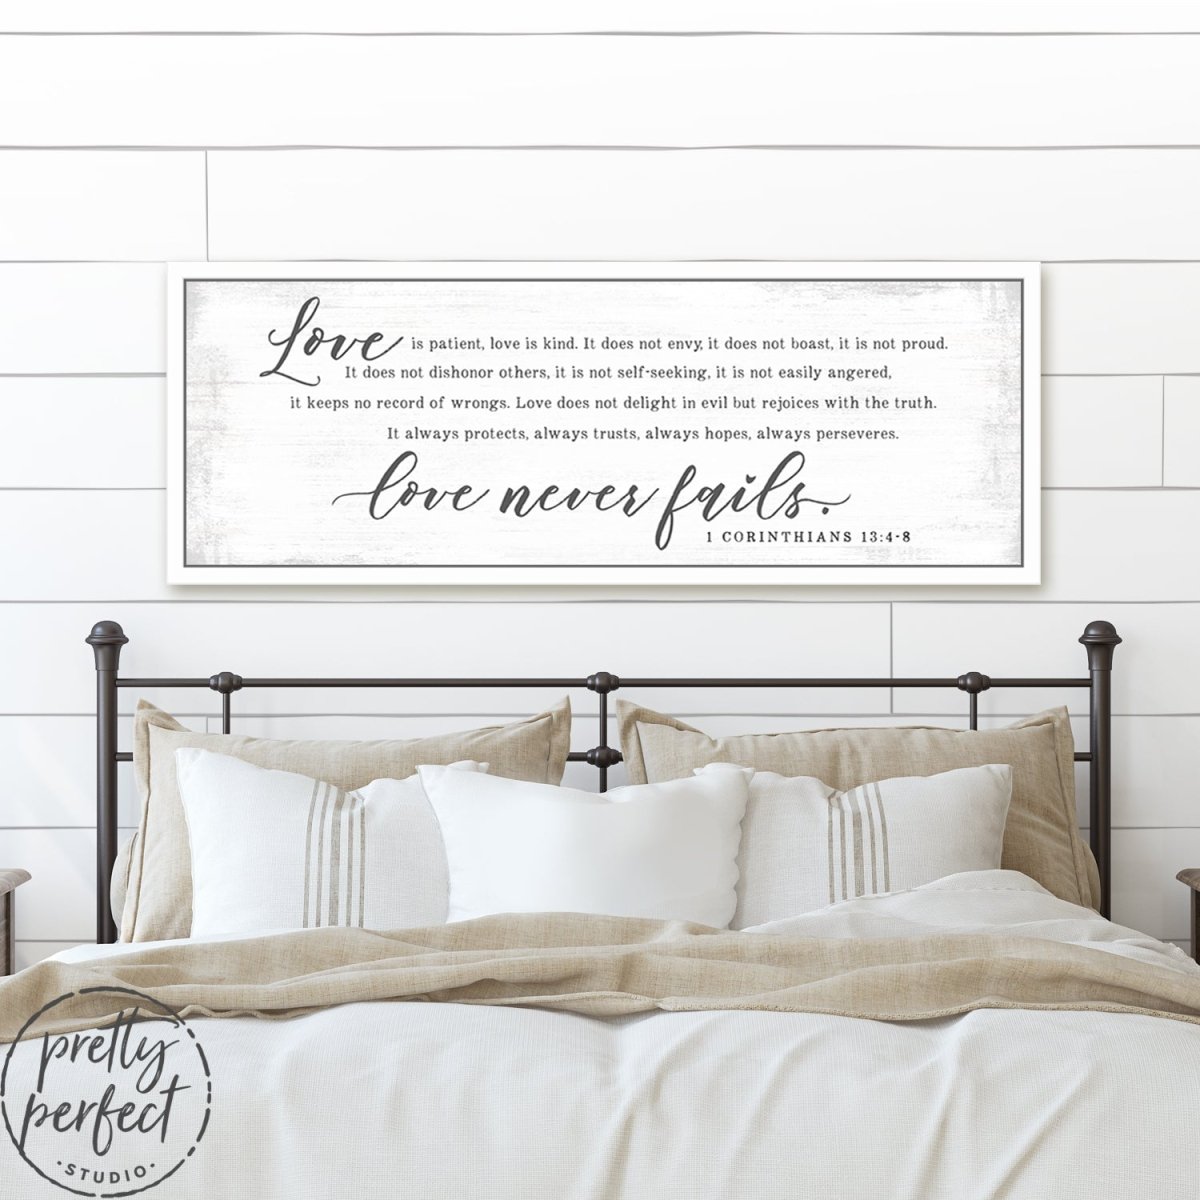 Love Is Patient, Love is Kind Bible Verse Wall Art Above Bed - Pretty Perfect Studio